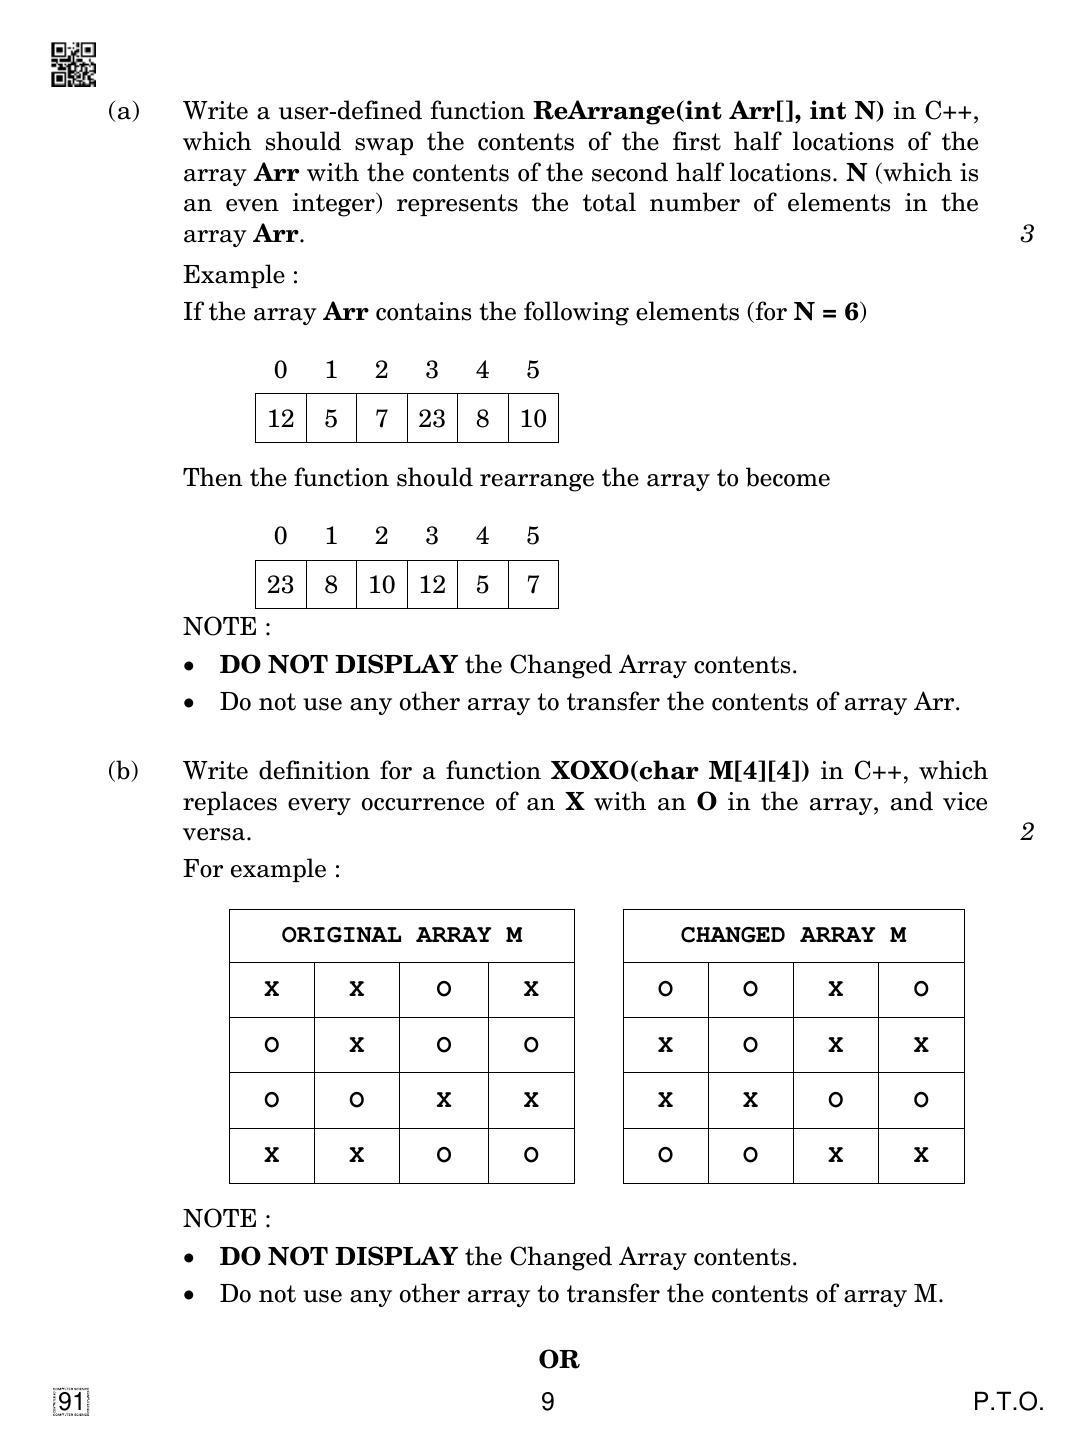 CBSE Class 12 91 Computer Science 2019 Question Paper - Page 9